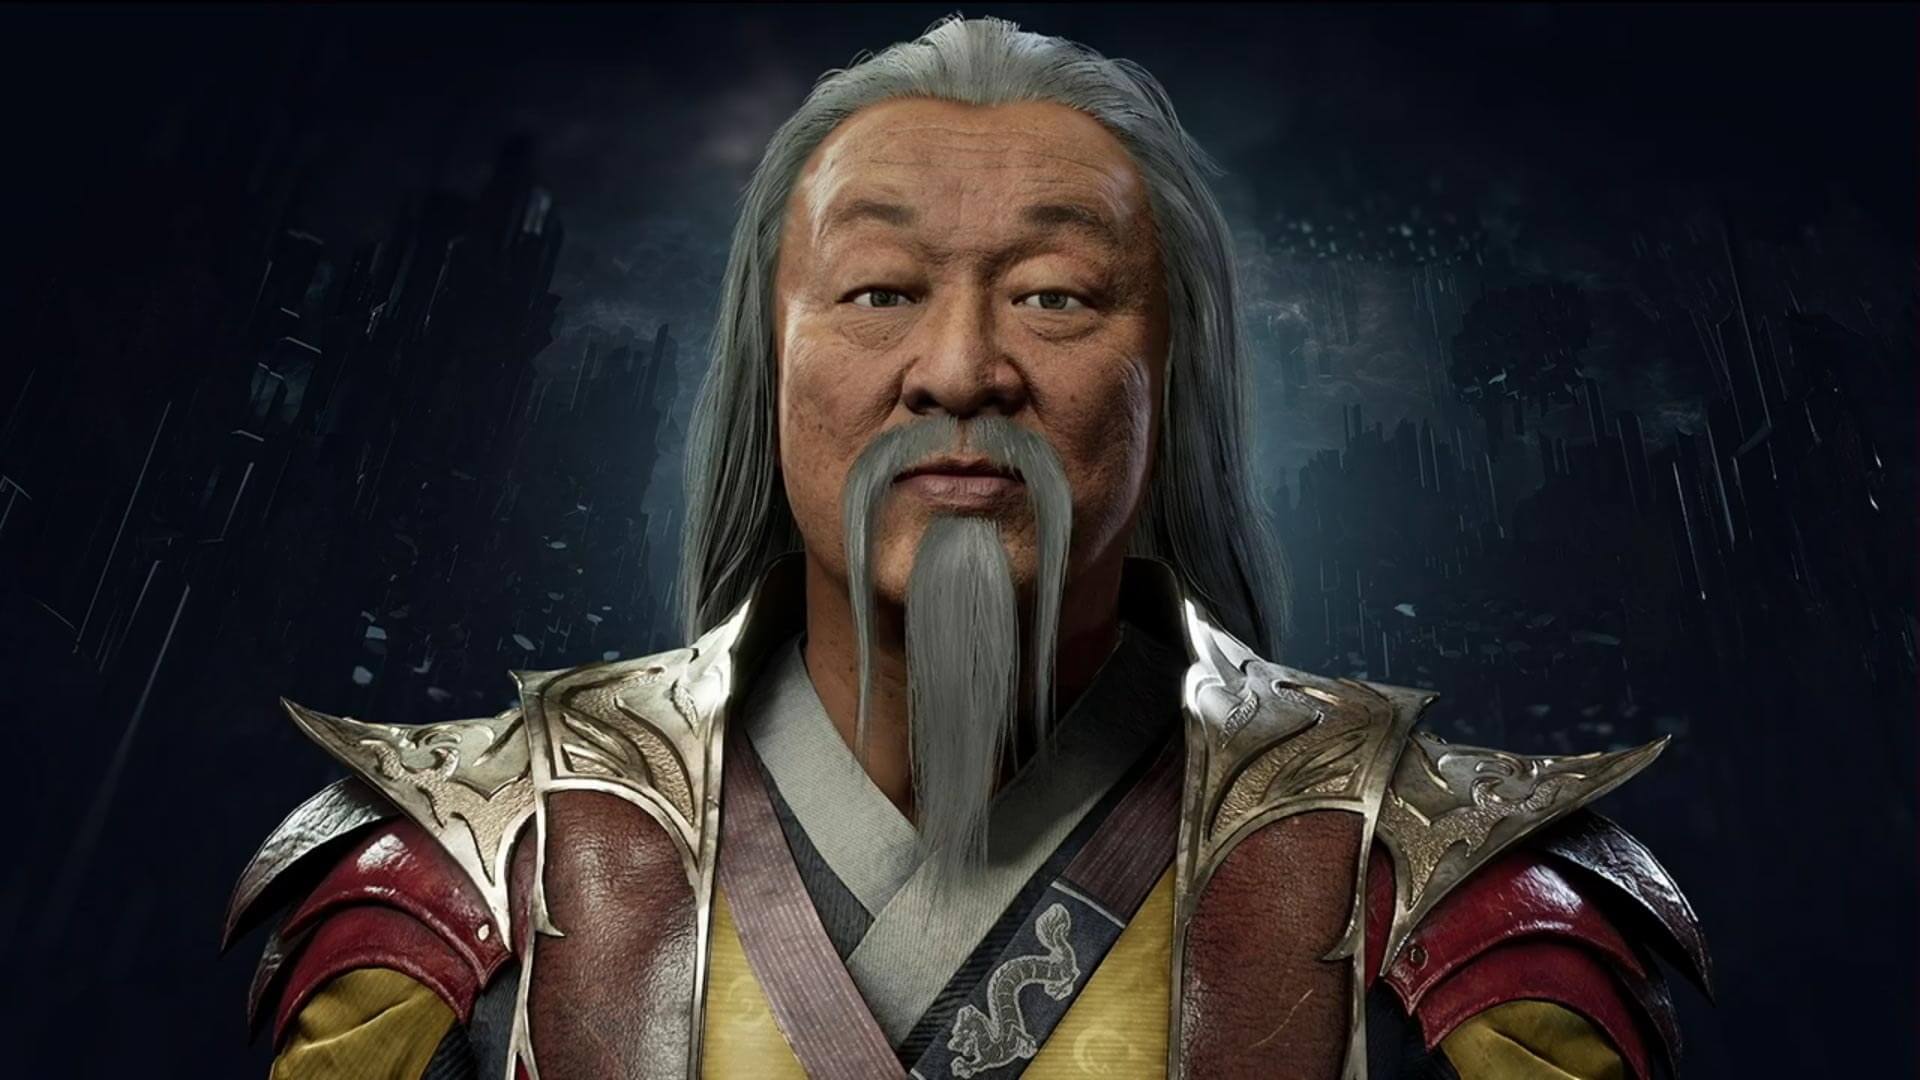 Mortal Kombat actor to reprise Shang Tsung role in upcoming game